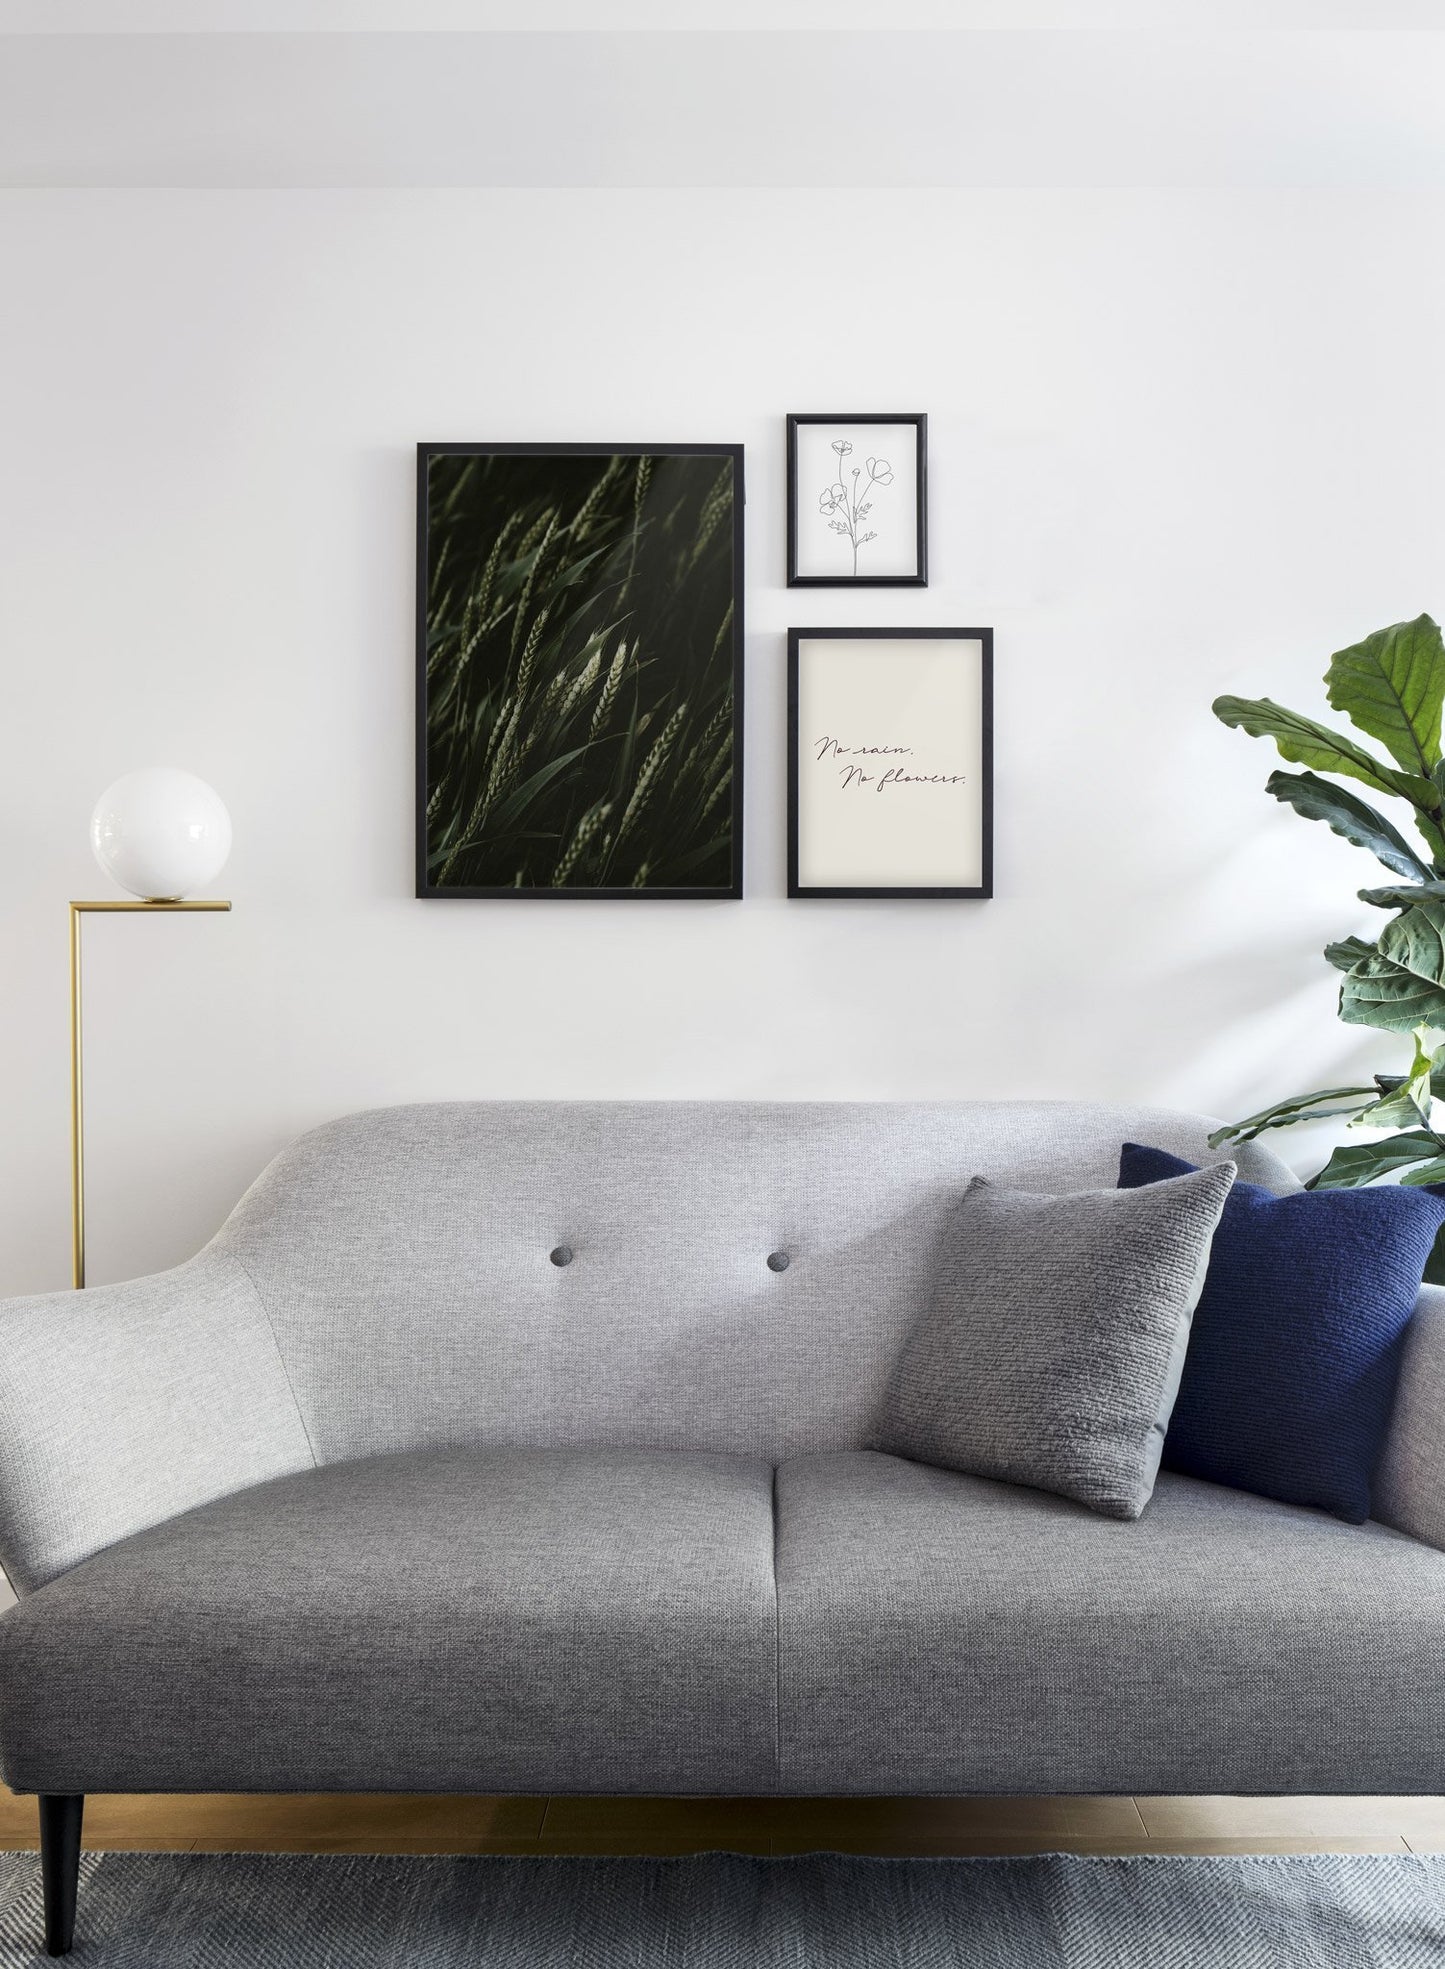 Young Wheat modern minimalist botanical photography poster by Opposite Wall - Living room with gallery wall trio